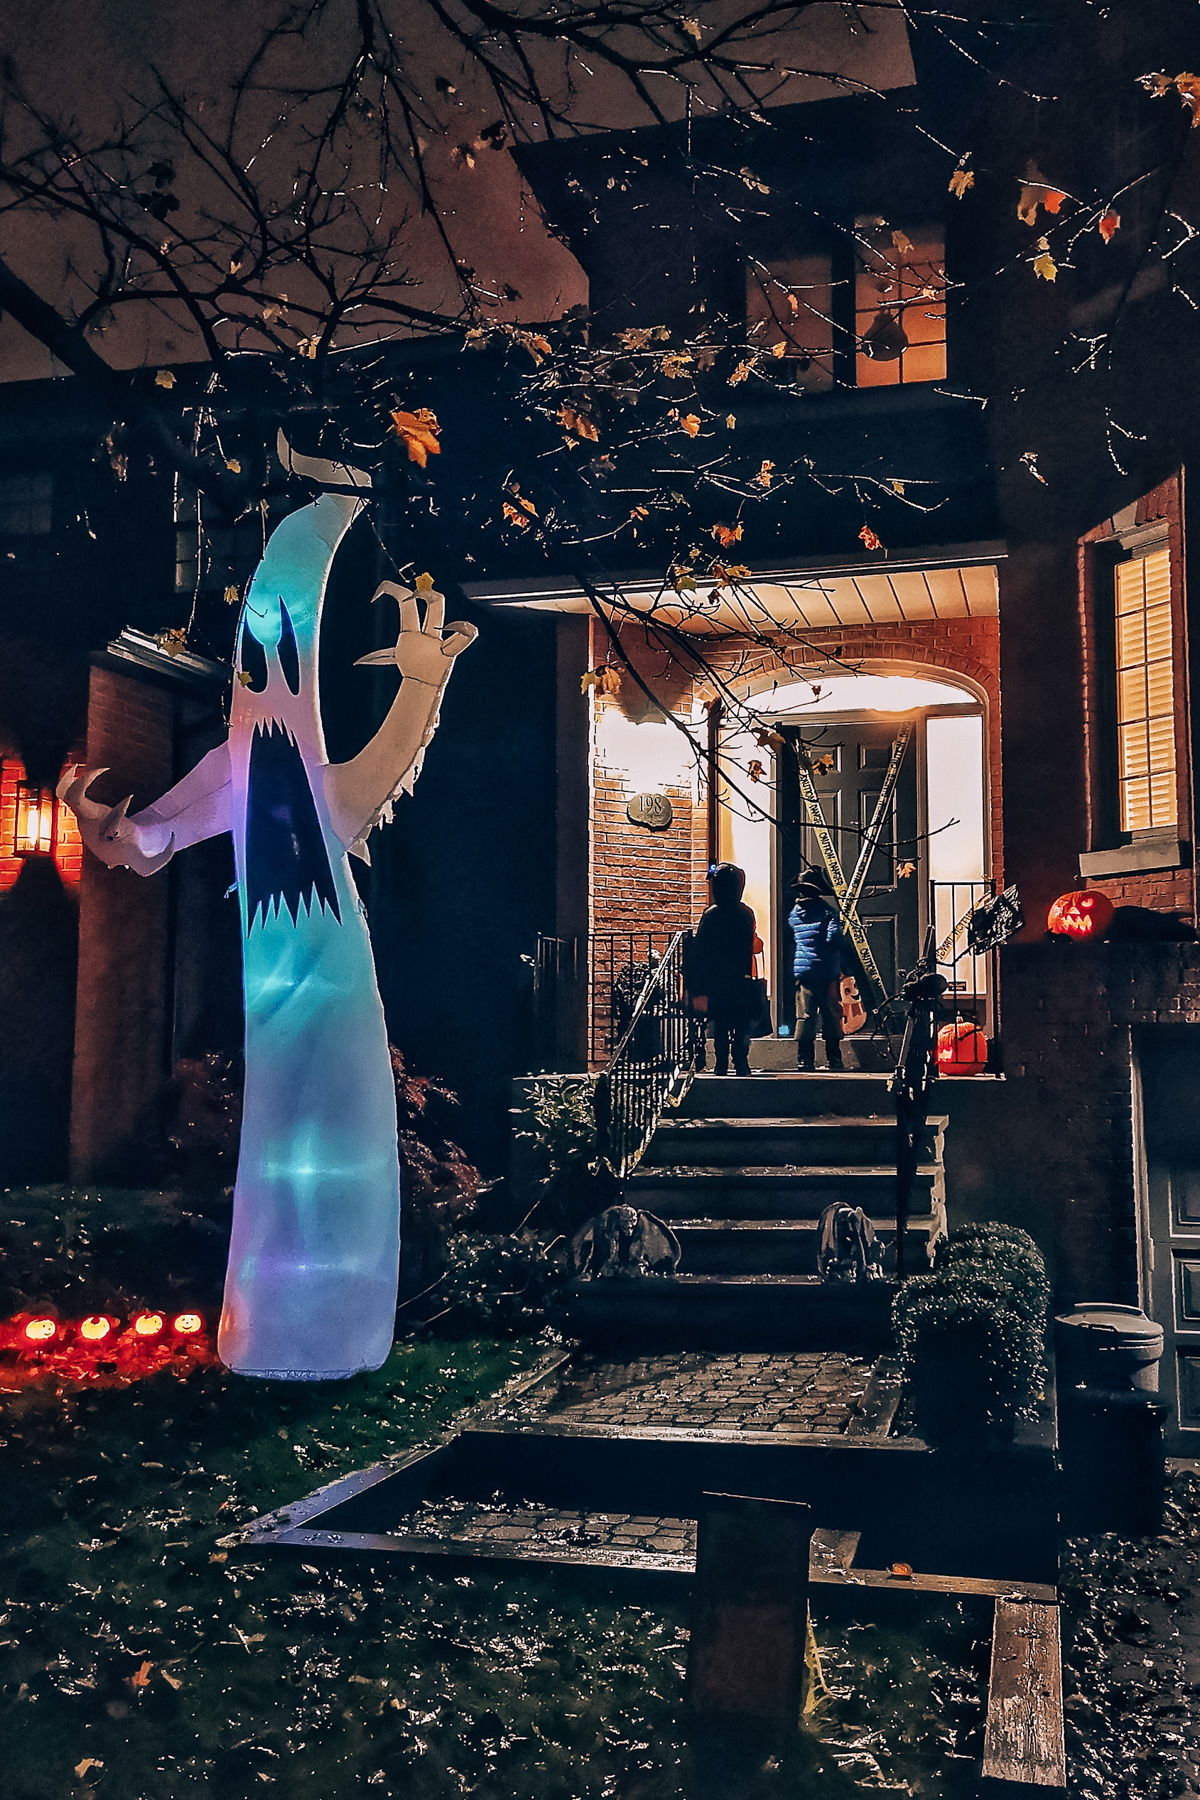 San Diego Haunted Houses-- Two children knocking on the door of a house decorated heavily for Halloween at night time.